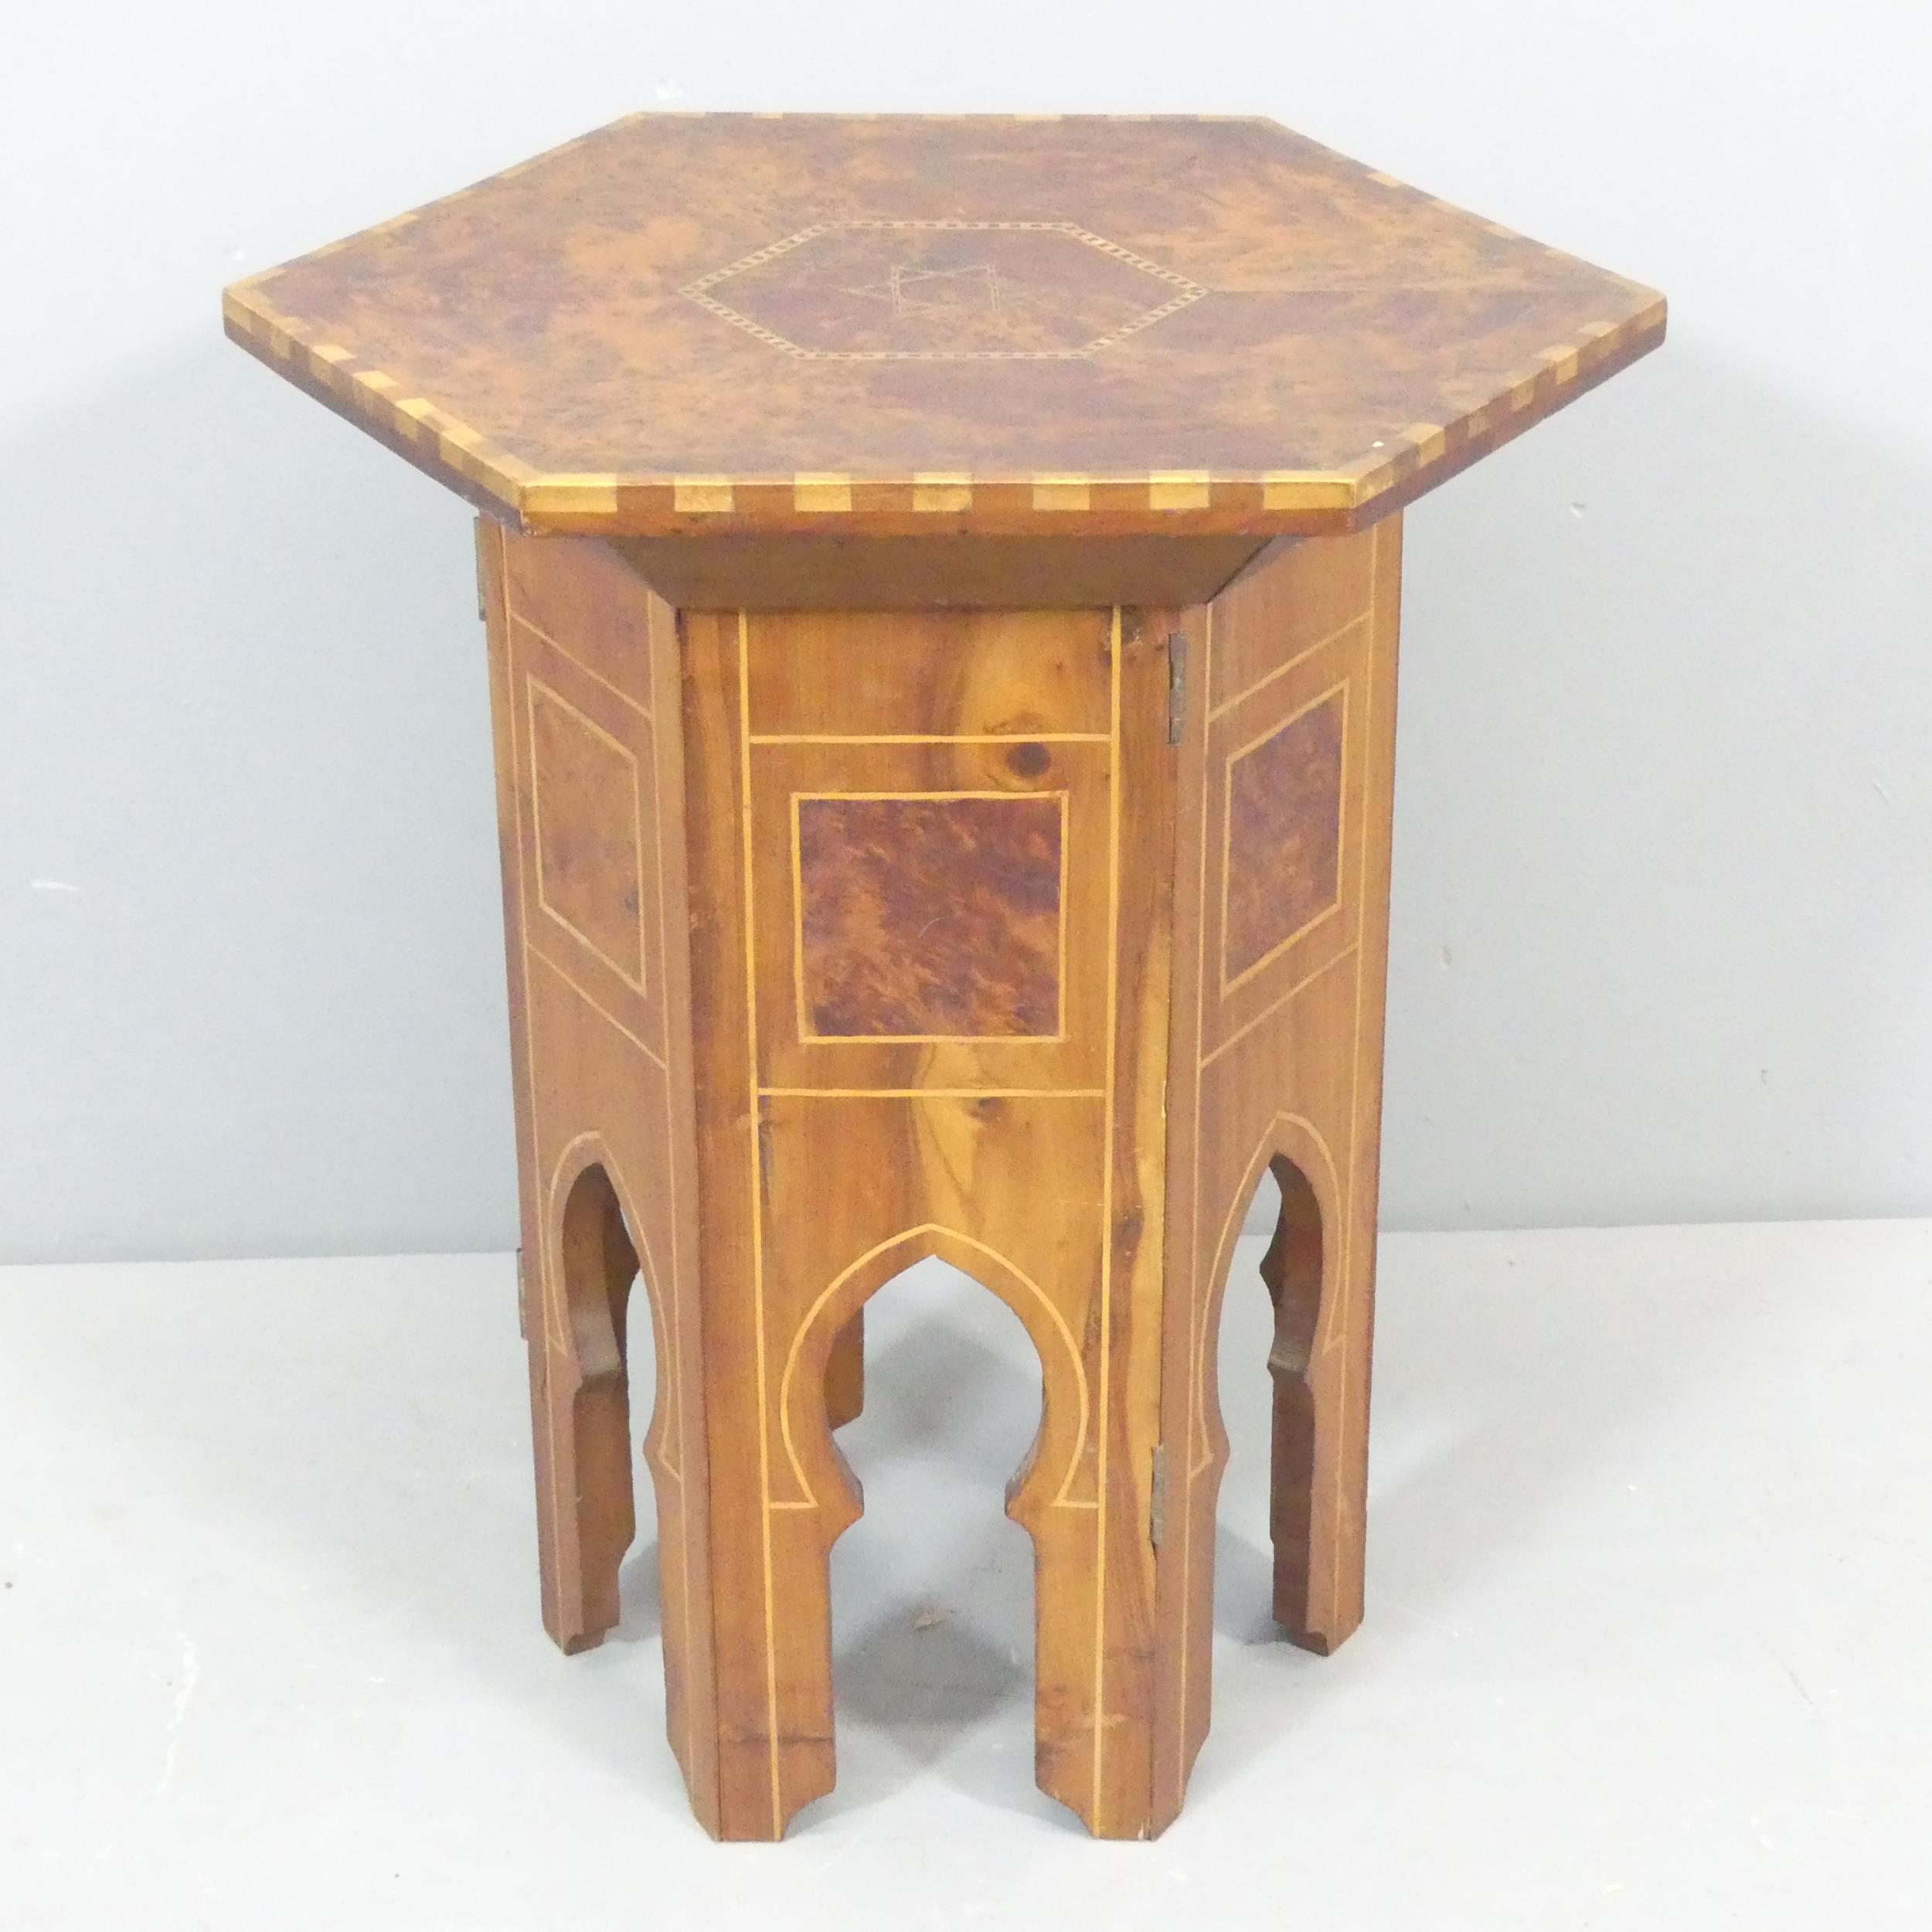 An antique Islamic Amboyna and satinwood strung hexagonal occasional table, with inlaid